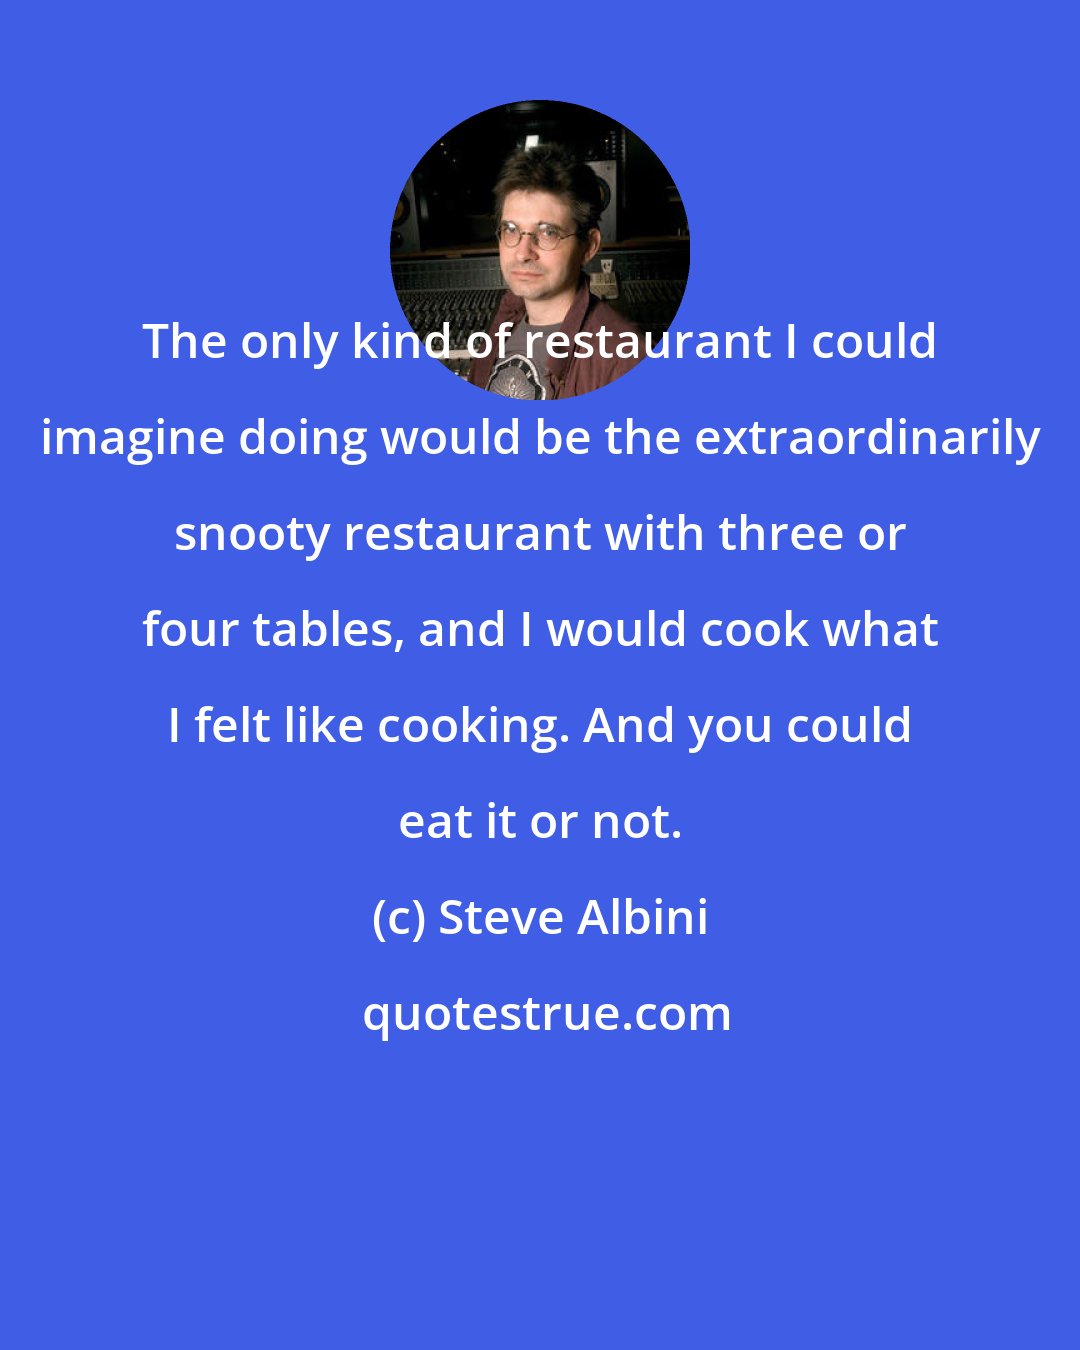 Steve Albini: The only kind of restaurant I could imagine doing would be the extraordinarily snooty restaurant with three or four tables, and I would cook what I felt like cooking. And you could eat it or not.